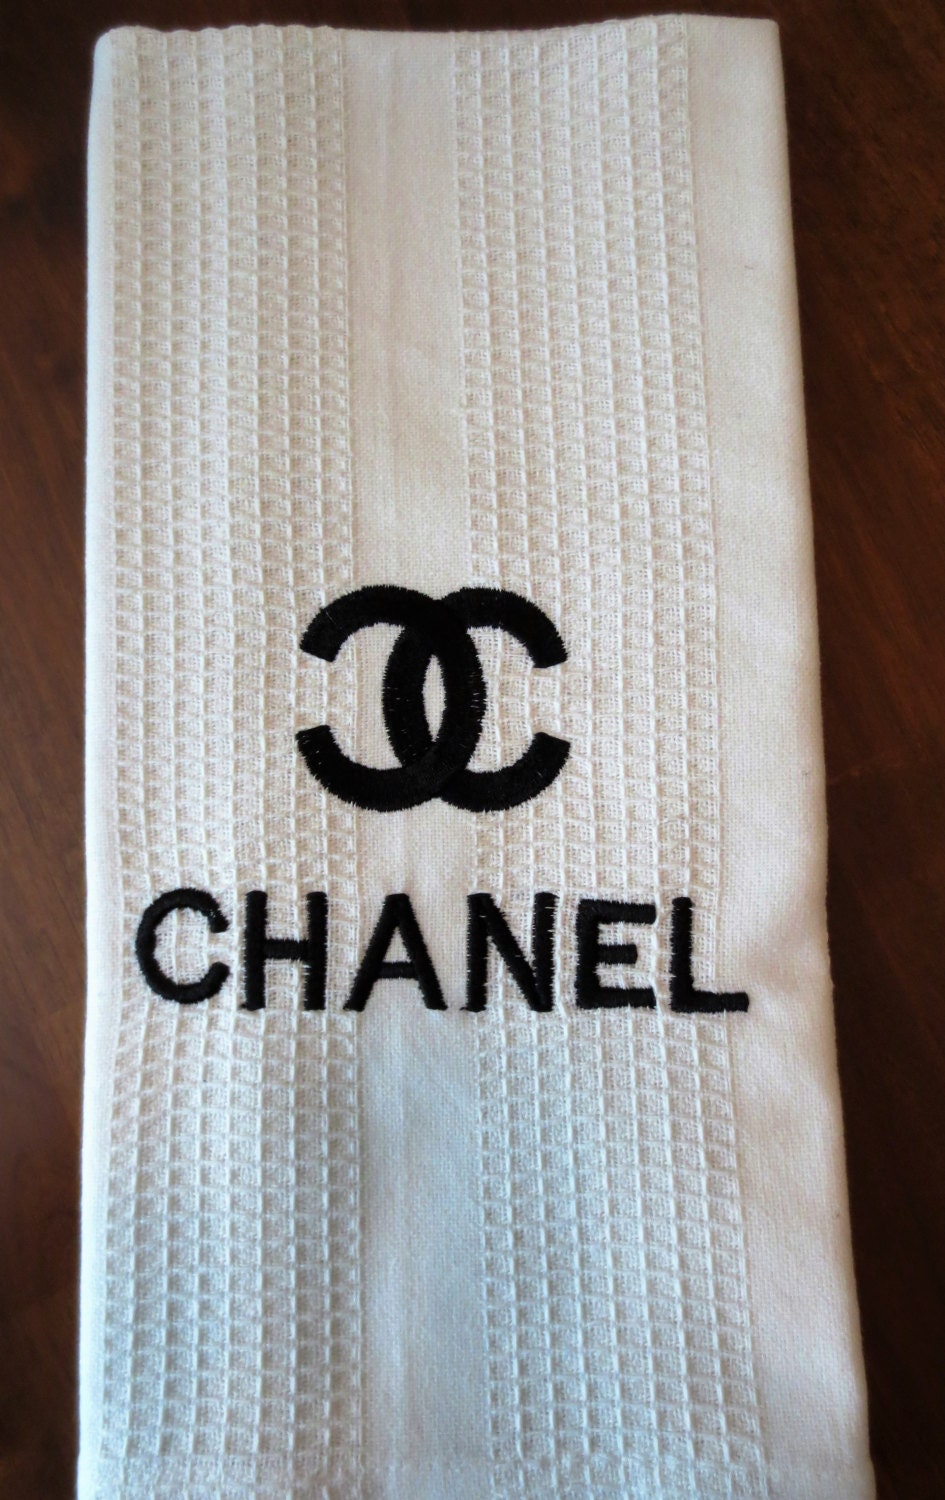 Chanel Inspired Machine Embroidered Kitchen Towel. White towel